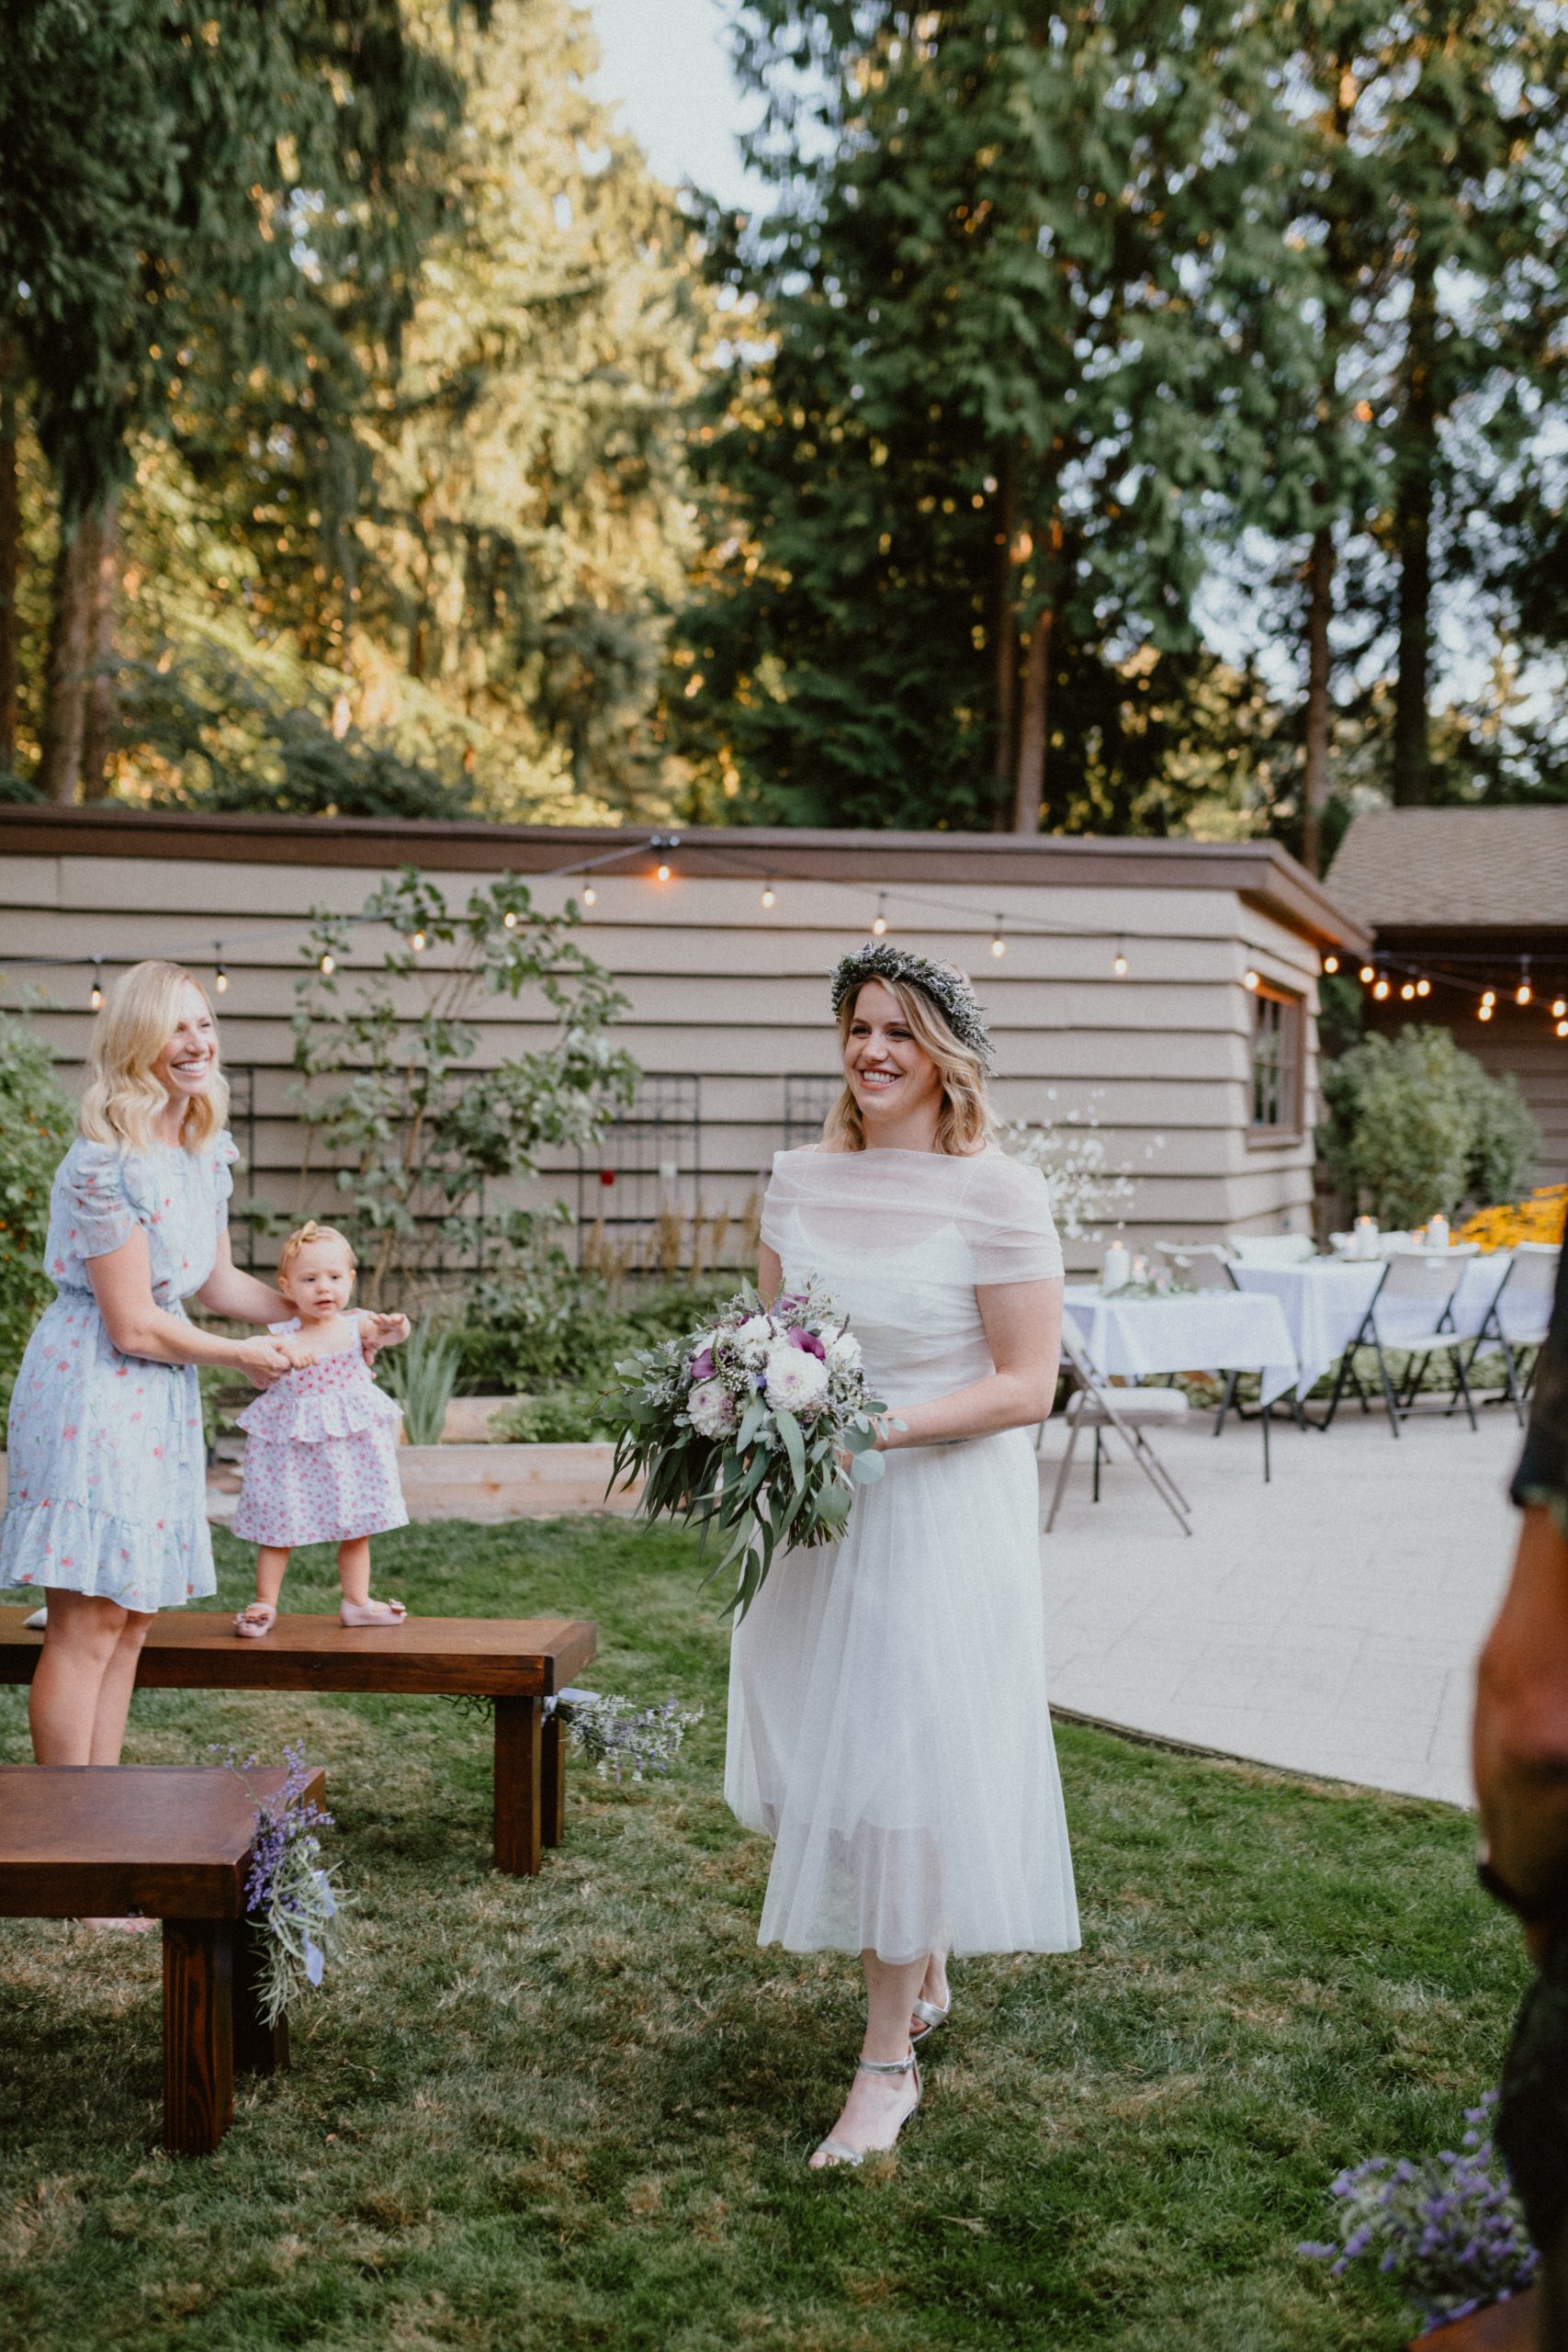 Bride walks down the aisle surrounded by family smiling at her, she wears a short wedding dress and lavender flower crown | Seattle Wedding Photographer, Seattle Elopement Photographer | chelseaabril.com